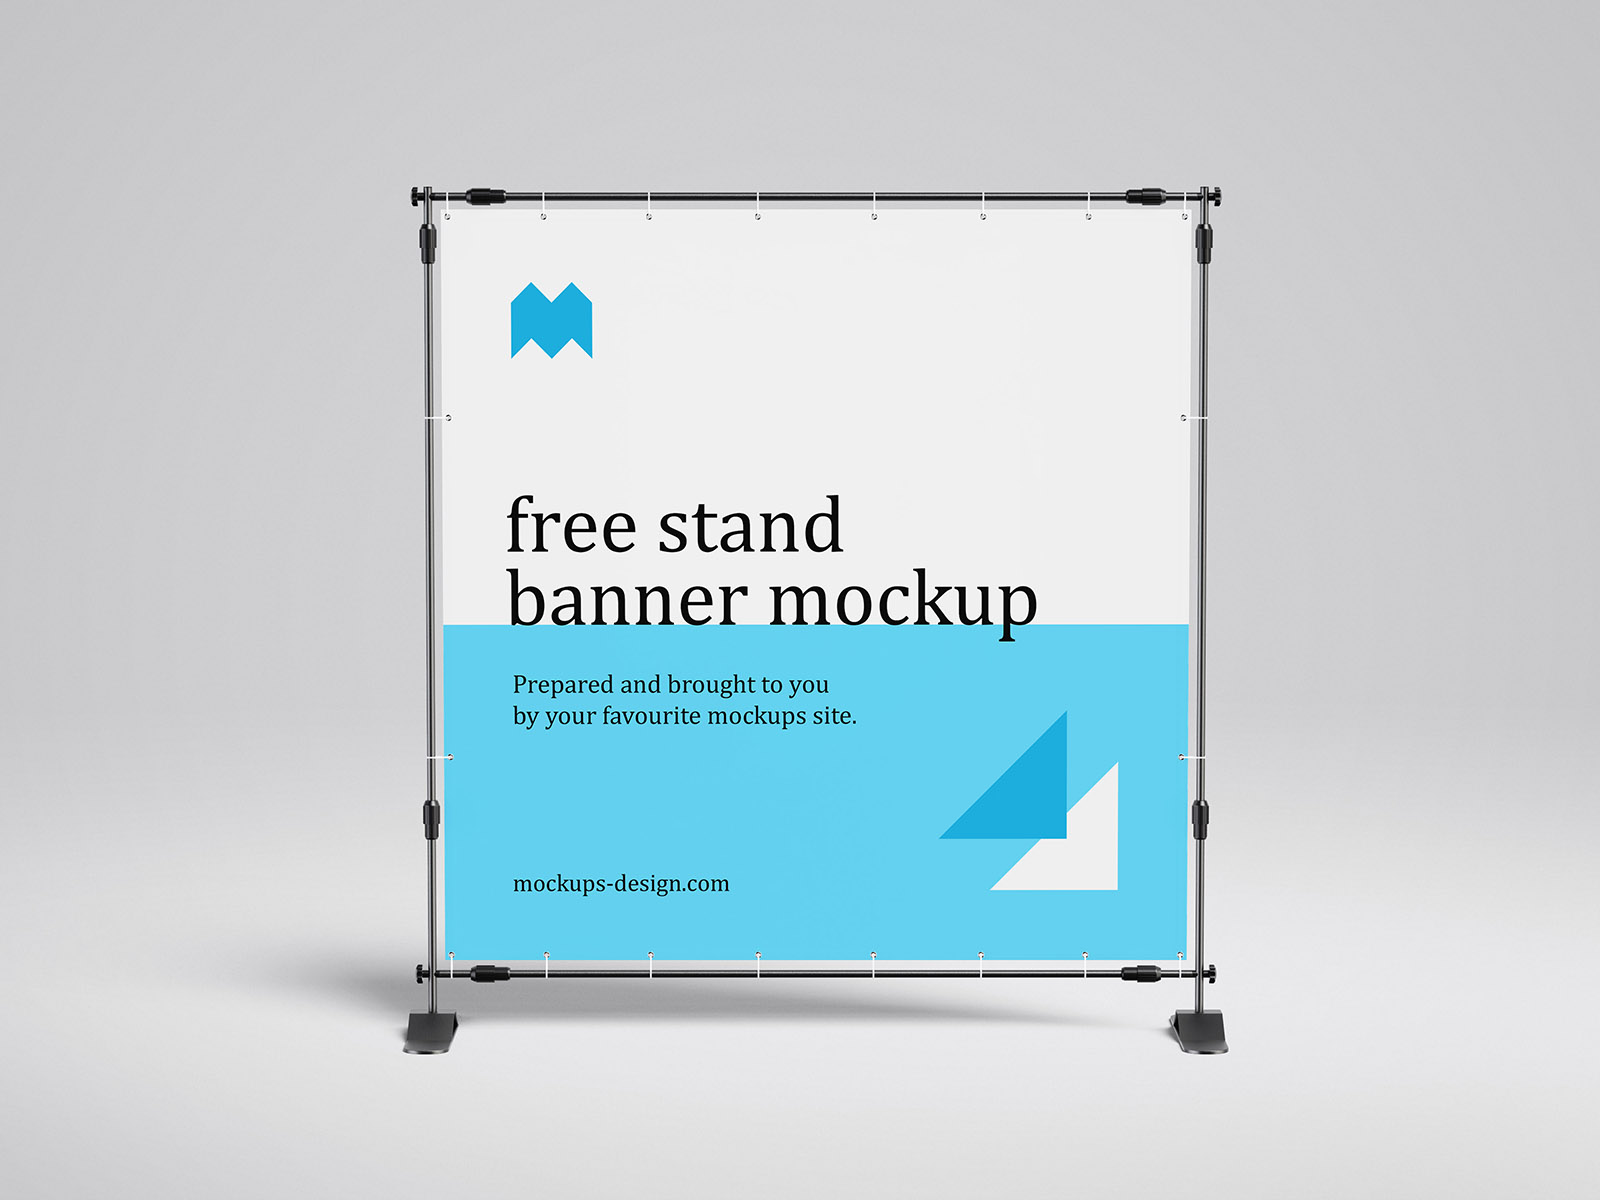 Free banner stand mockup / 200x200 cm